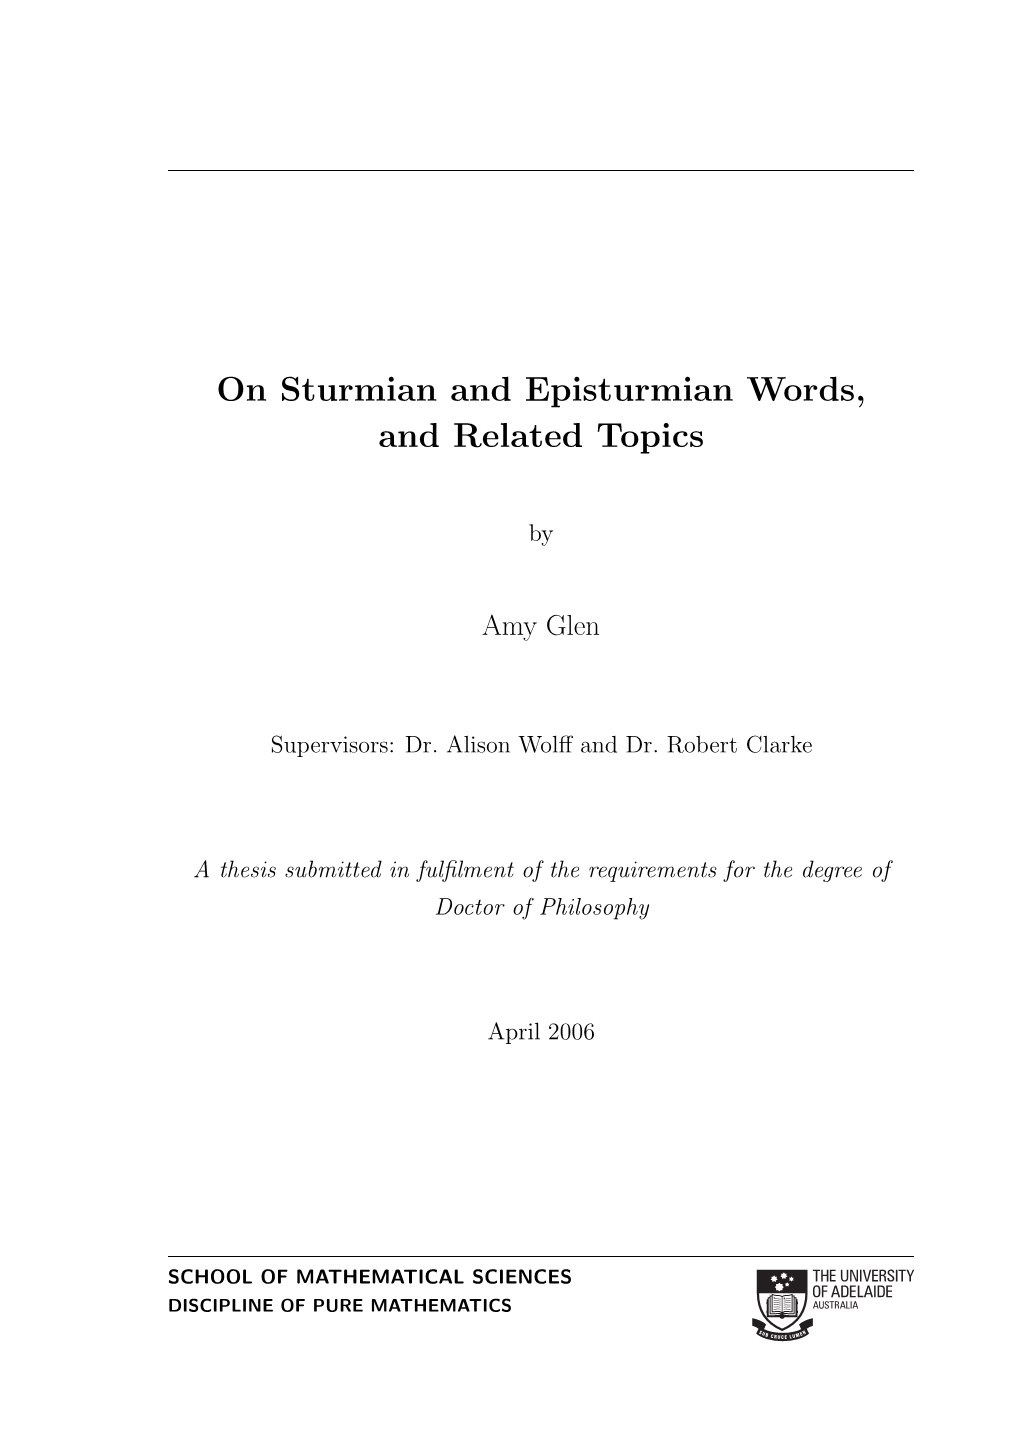 On Sturmian and Episturmian Words, and Related Topics